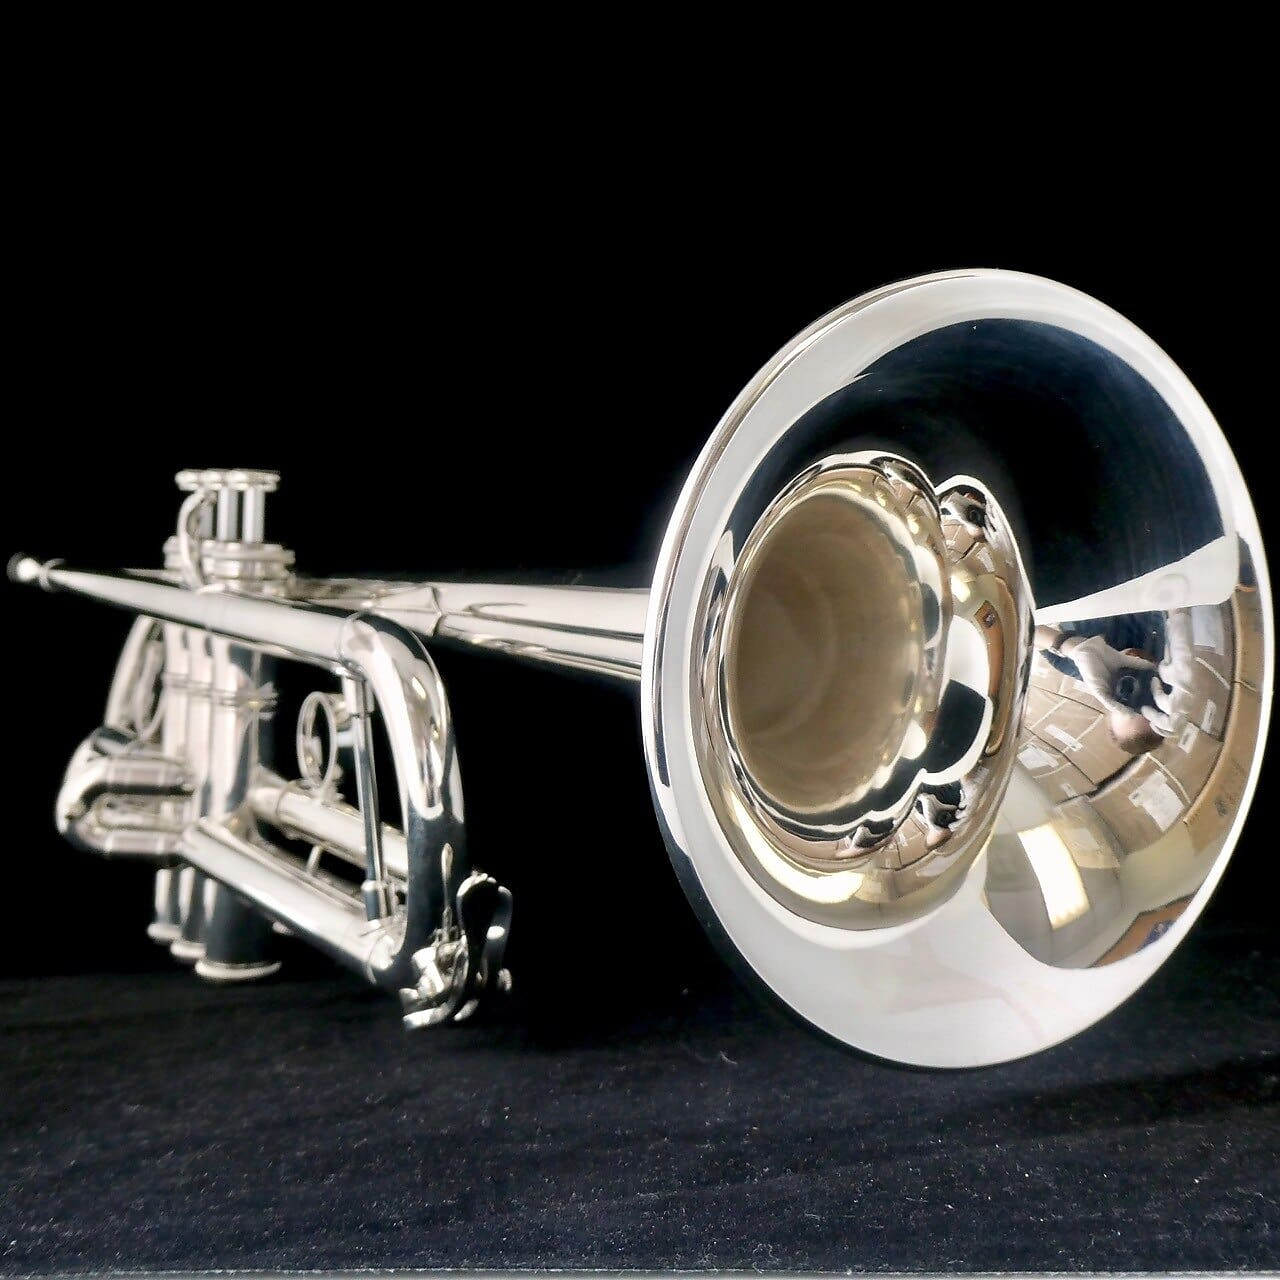 The Wonderful XO 1600I Roger Ingram Model Trumpet in Lacquer or Silver  Plate!